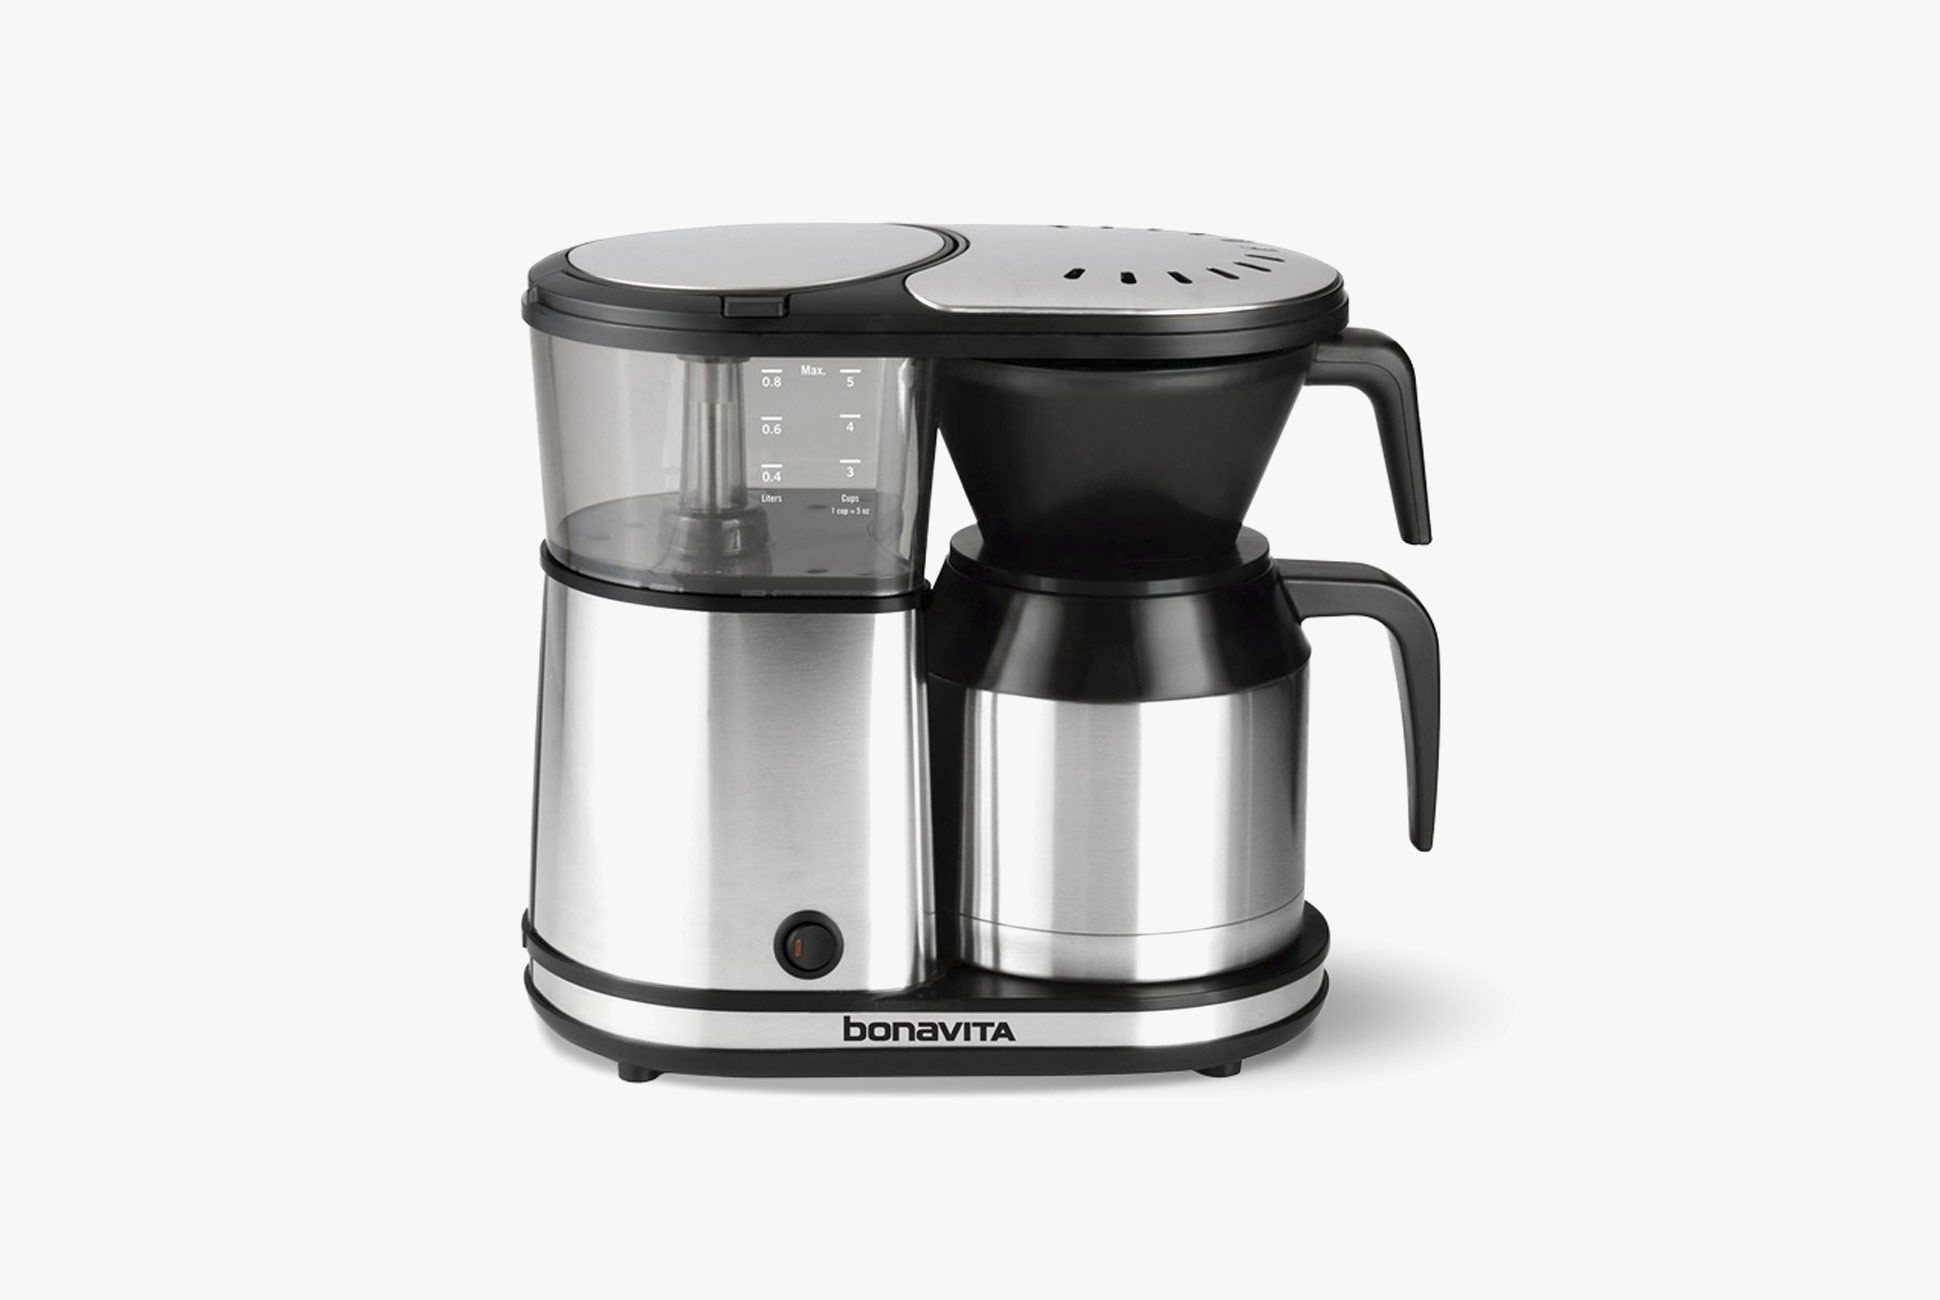 Bonavita 5-Cup One-Touch Coffee Maker Featuring Thermal Carafe BV1500TS